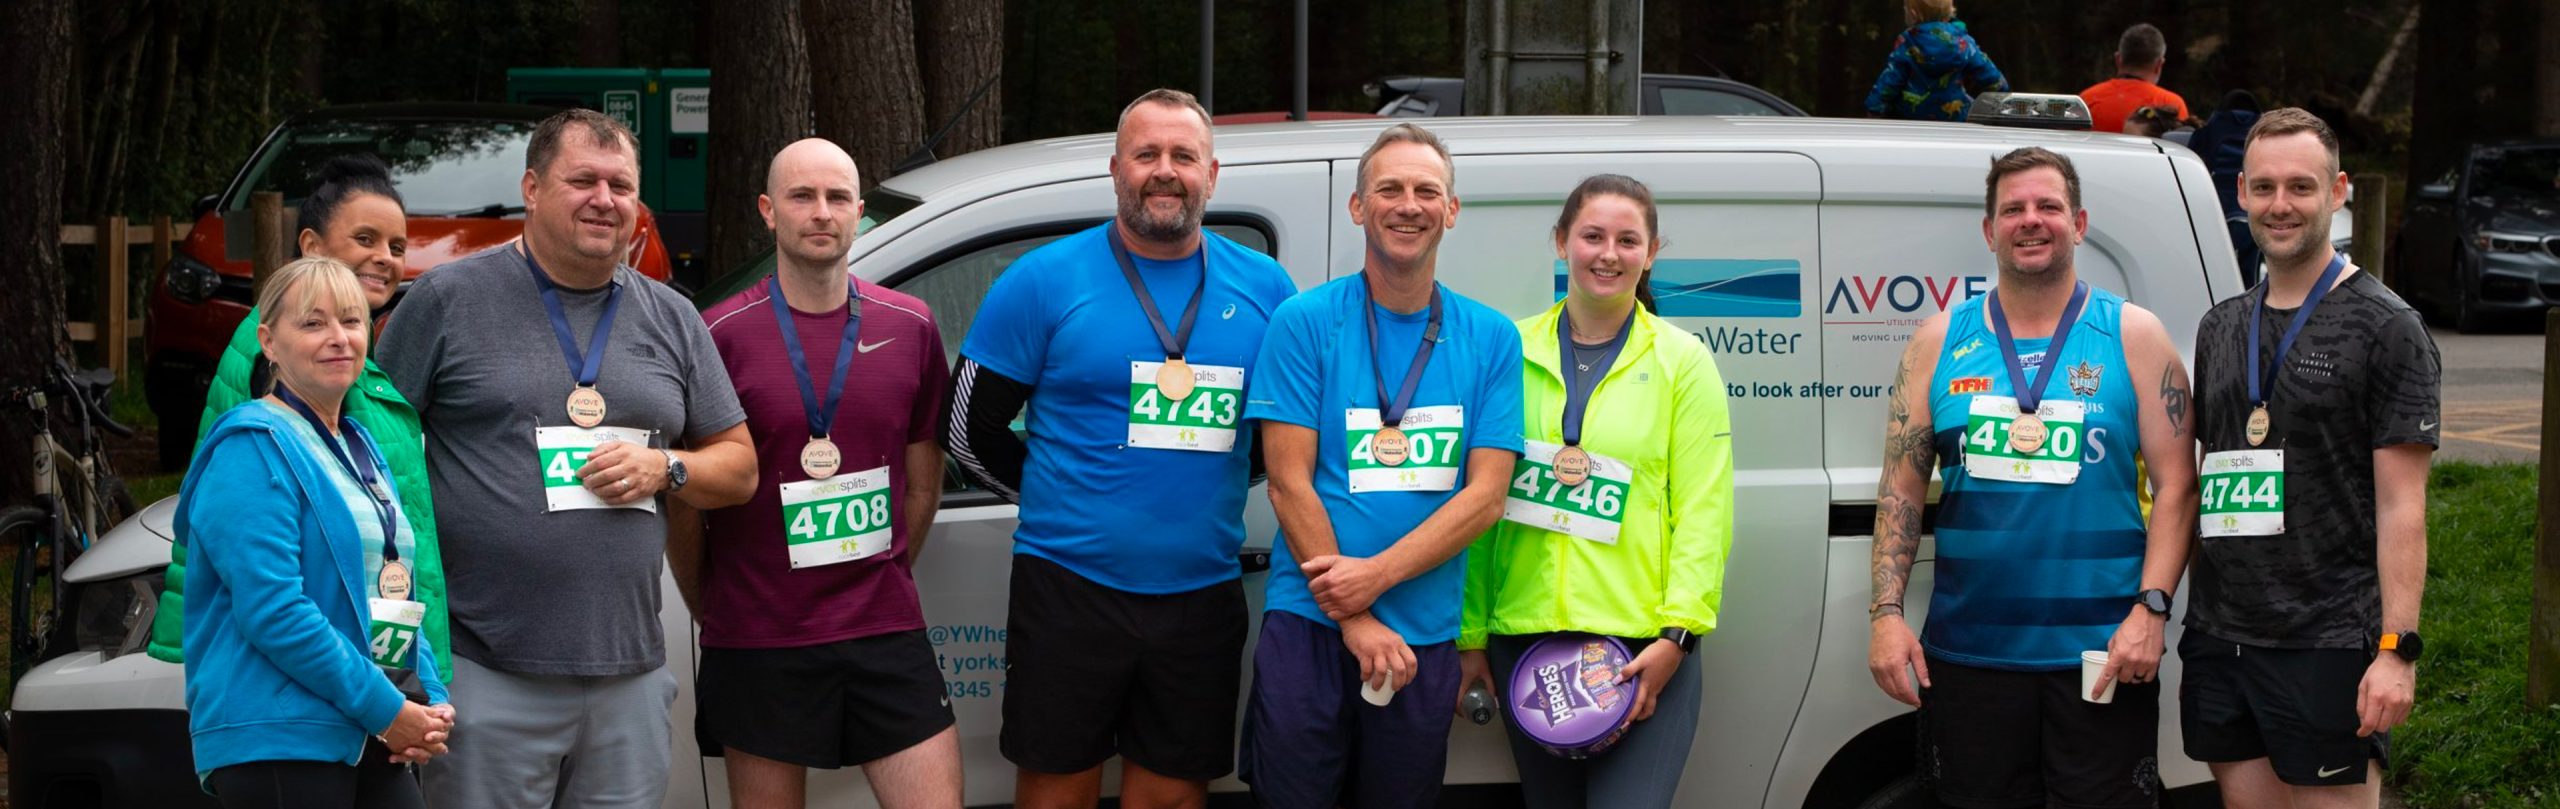 Avove team complete Yorkshire Run for WaterAid